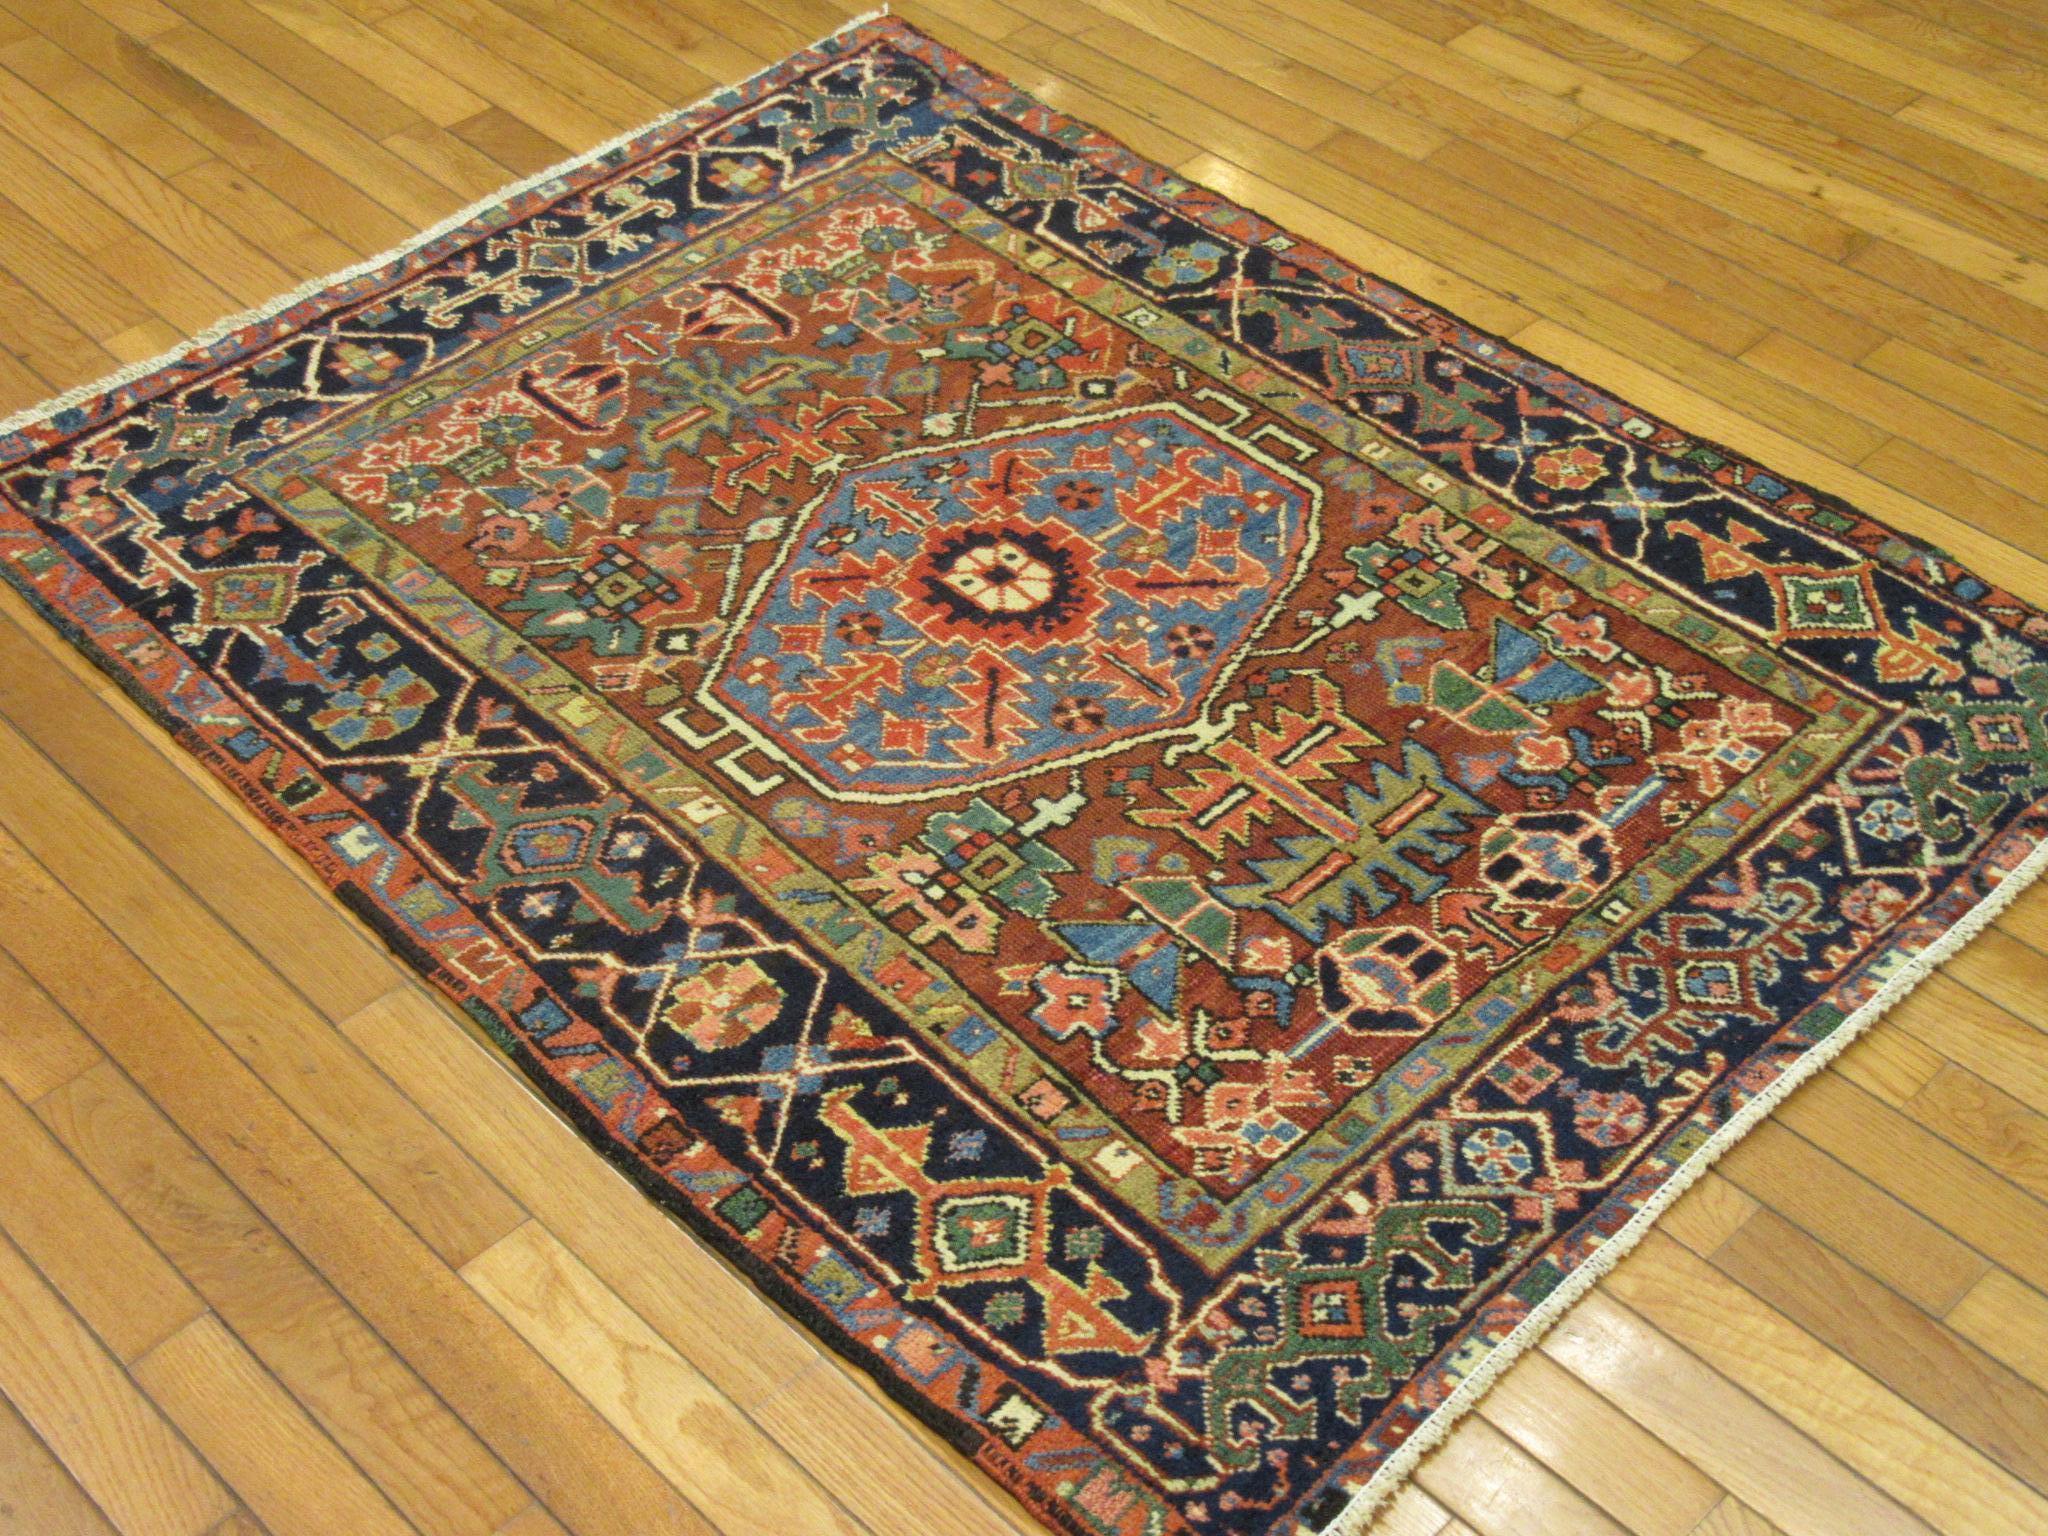 Small Antique Hand-Knotted Wool Persian Heriz Rug 1